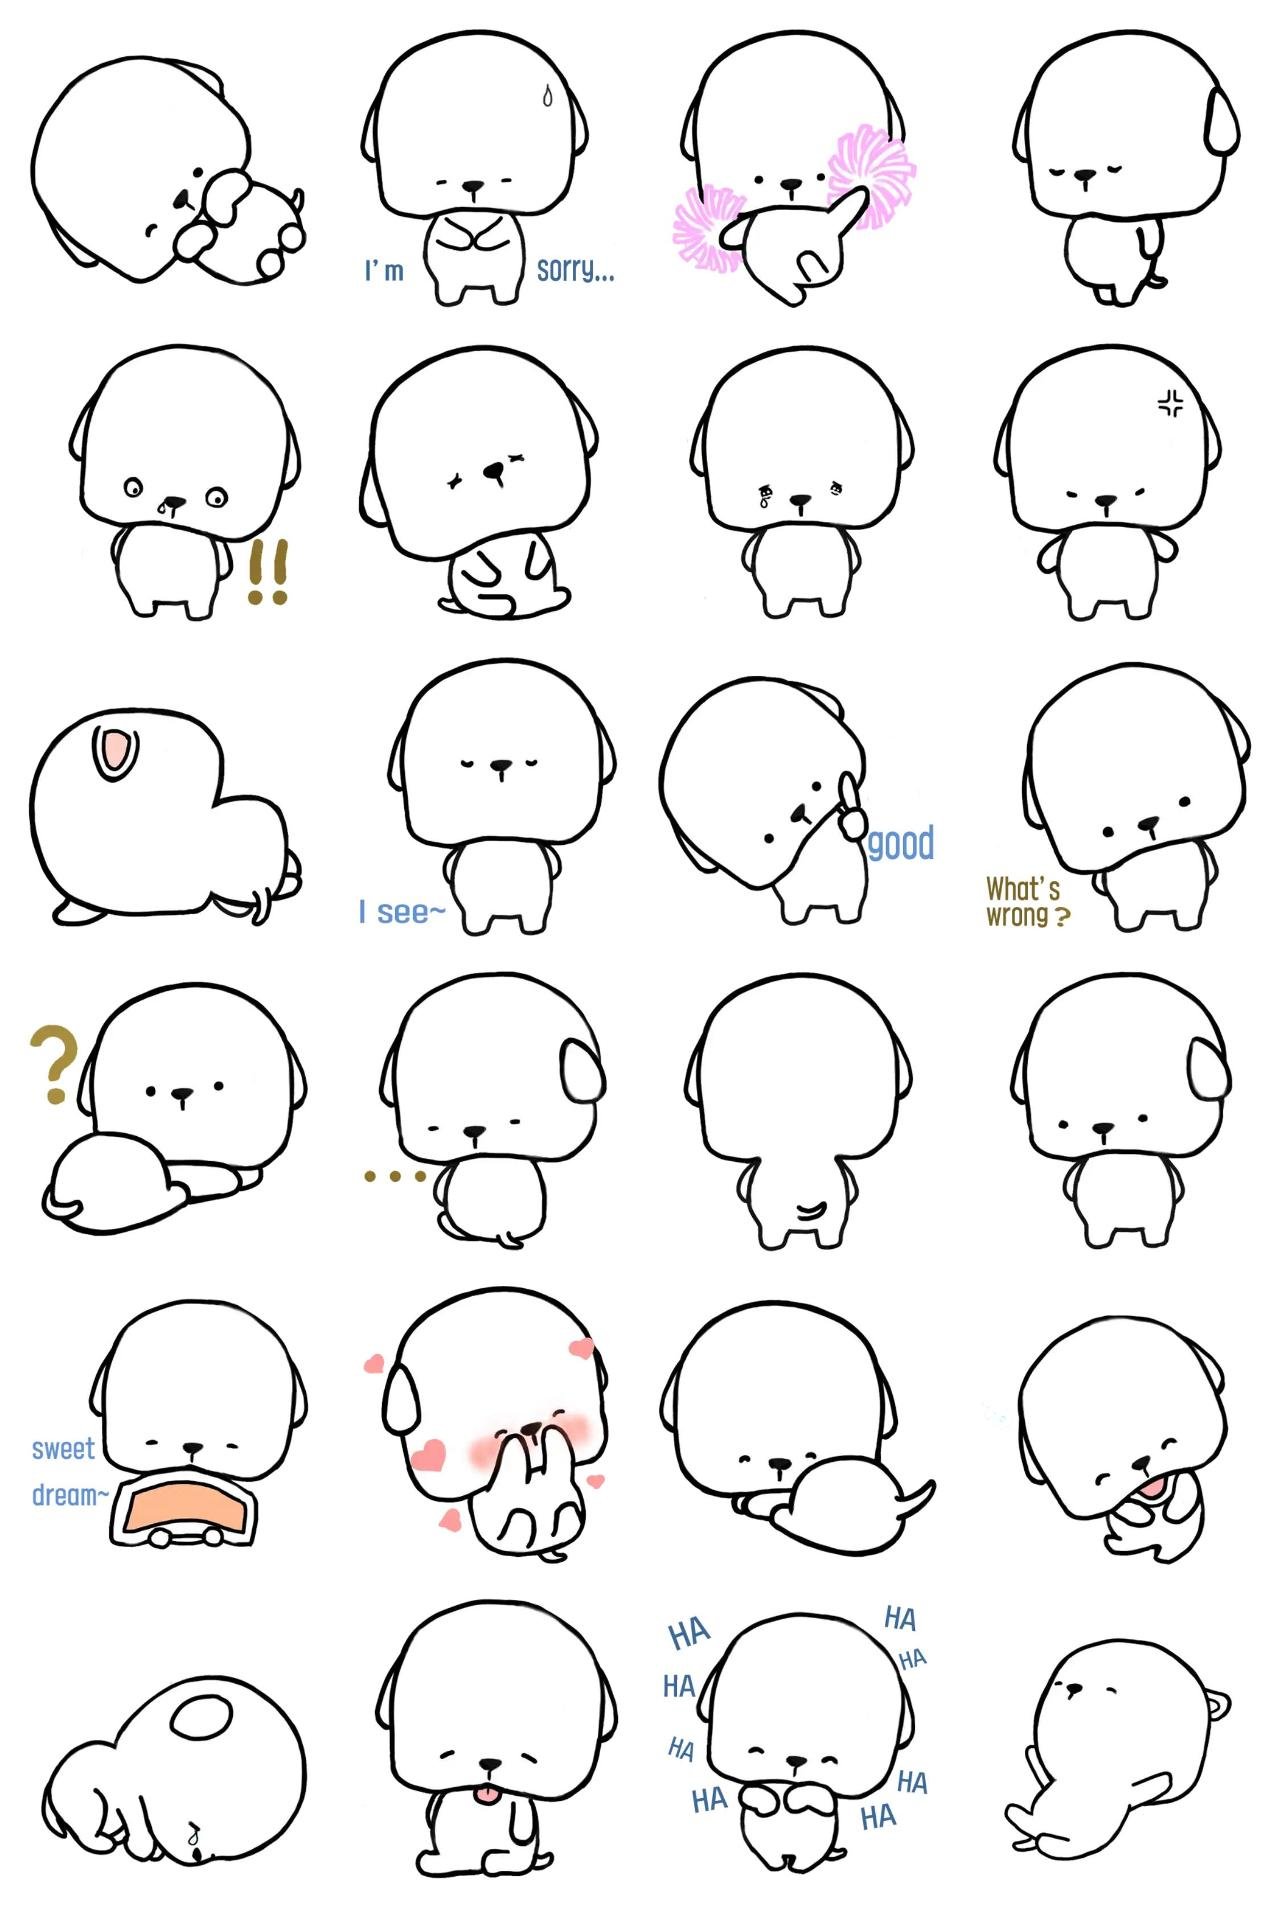 Ggomjirak Animals sticker pack for Whatsapp, Telegram, Signal, and others chatting and message apps